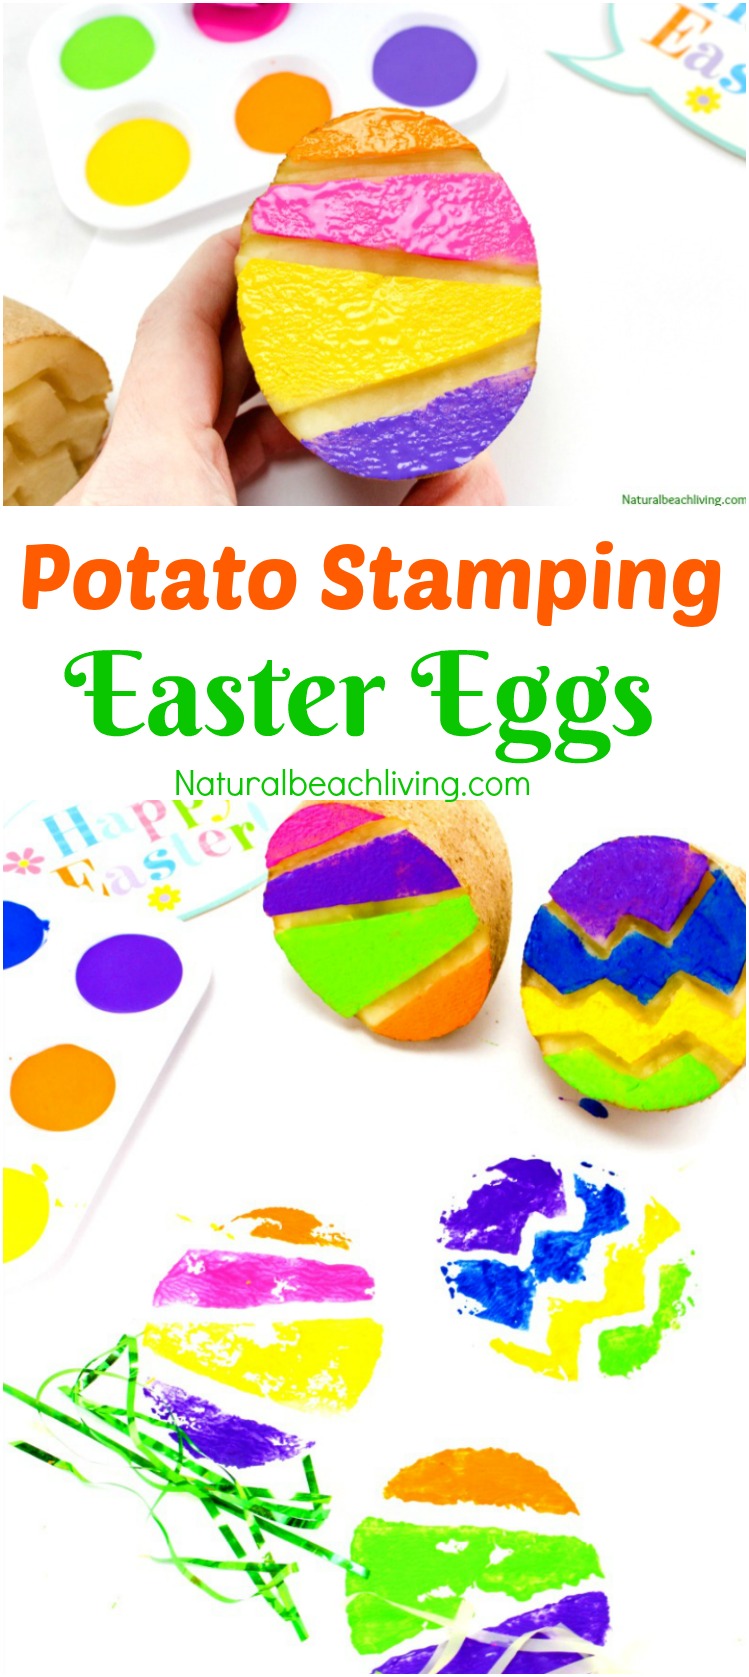 The Best Easter Egg Potato Stamp Ideas for Kids, Great Easter Craft, Potato Stamping, Art for preschoolers and Spring Activities for Kids, We Love Painting 